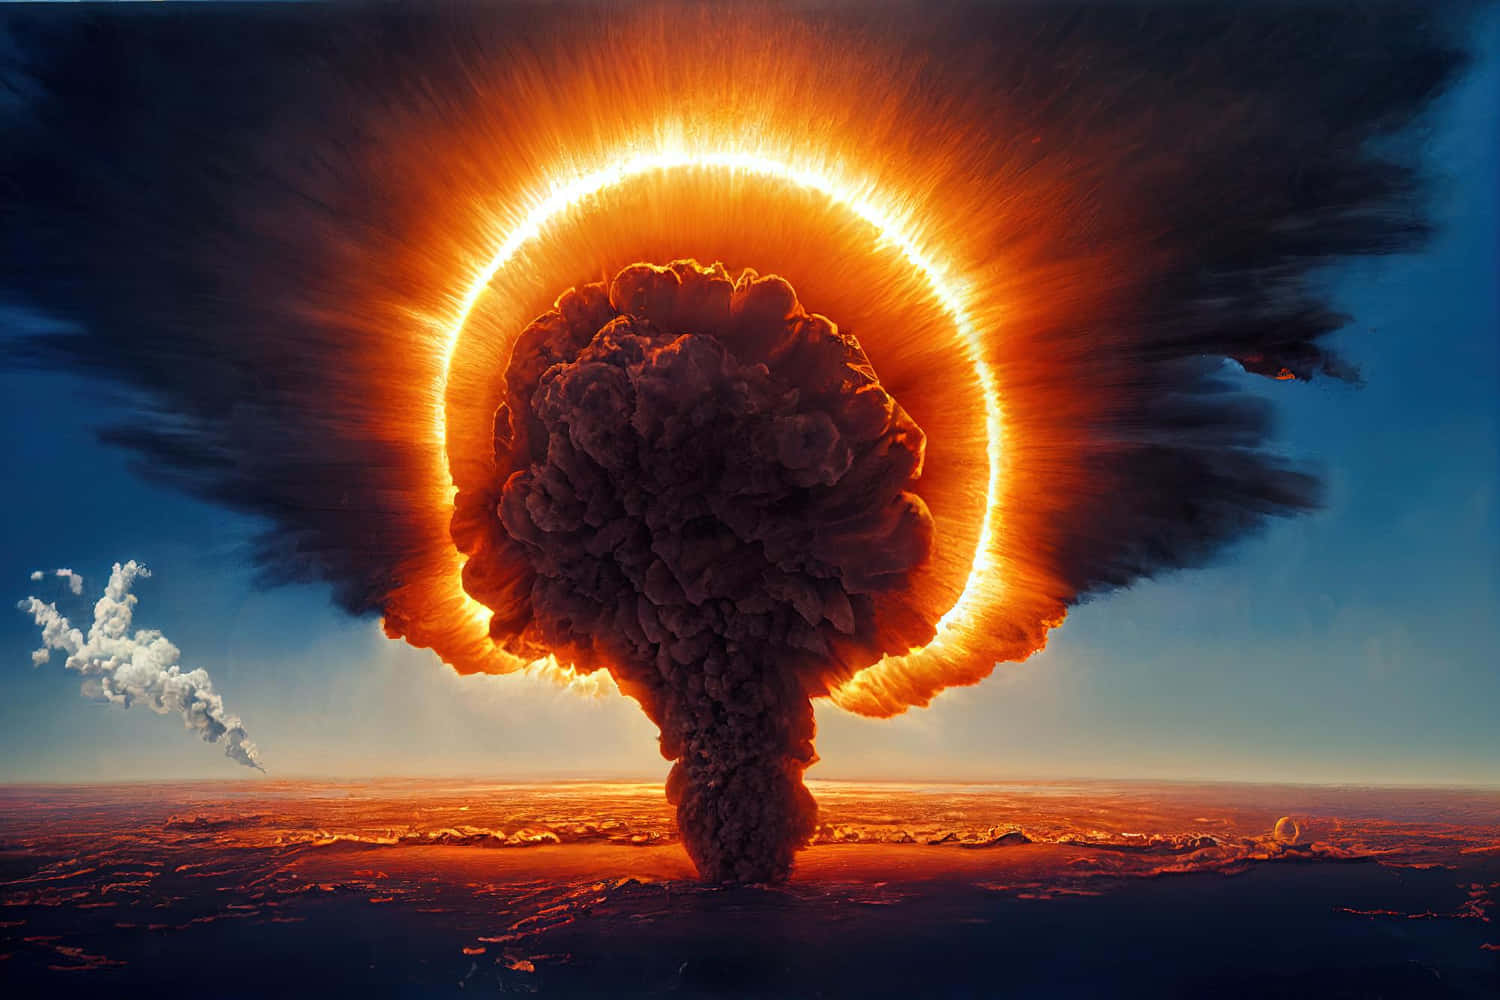 Majestic_ Nuclear_ Explosion_ At_ Sunset.jpg Background